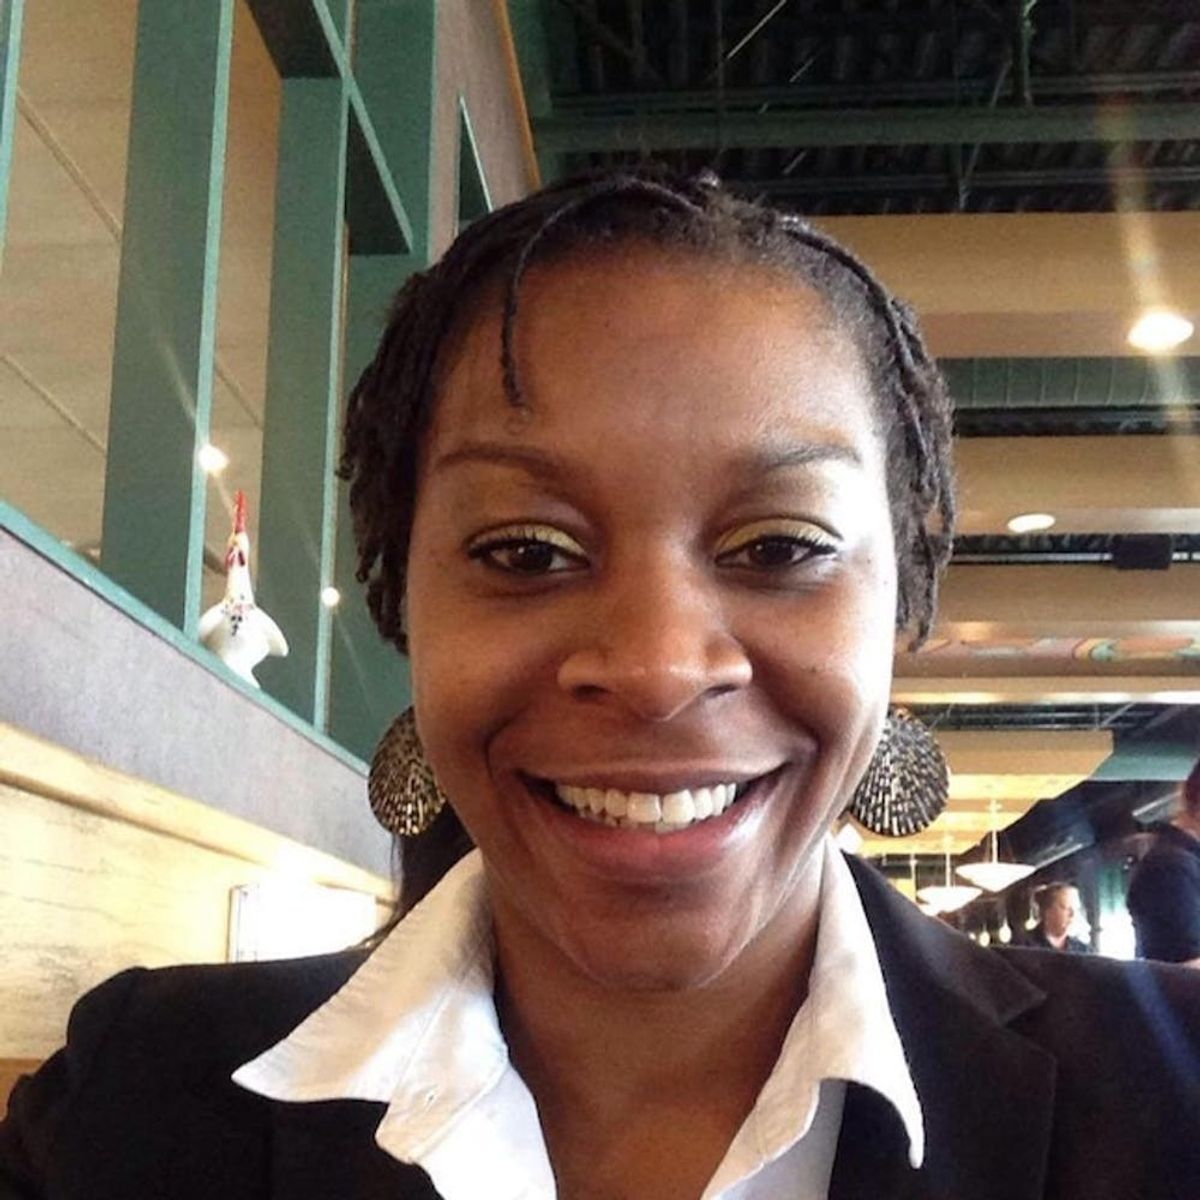 What You Need to Know to Talk About Sandra Bland